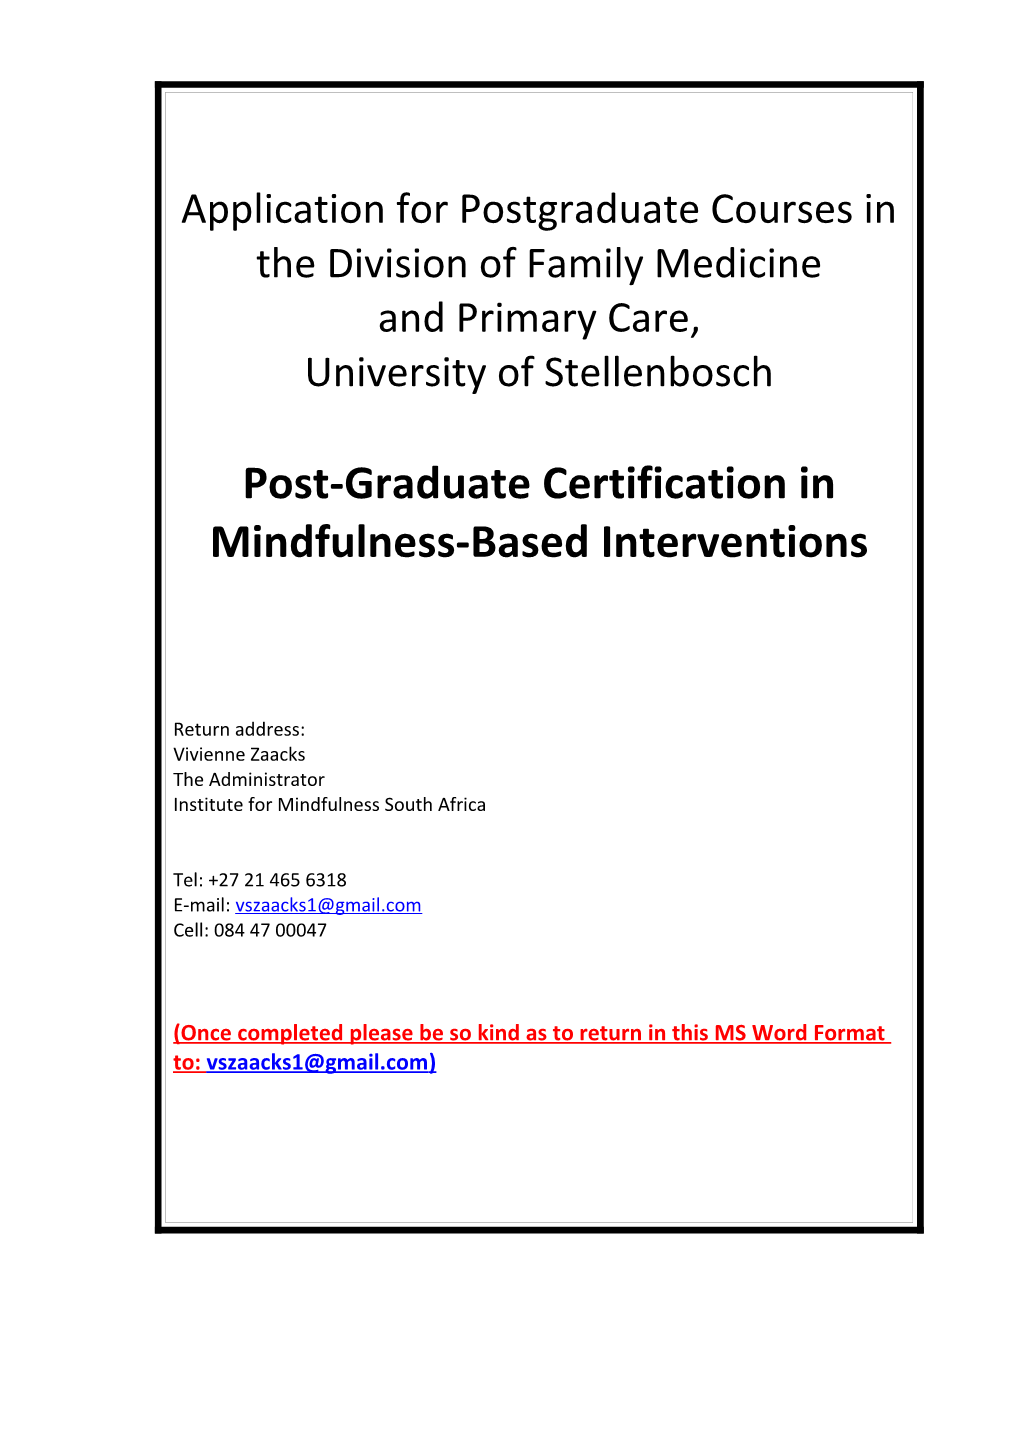 Application for Postgraduate Courses in the Division of Family Medicine